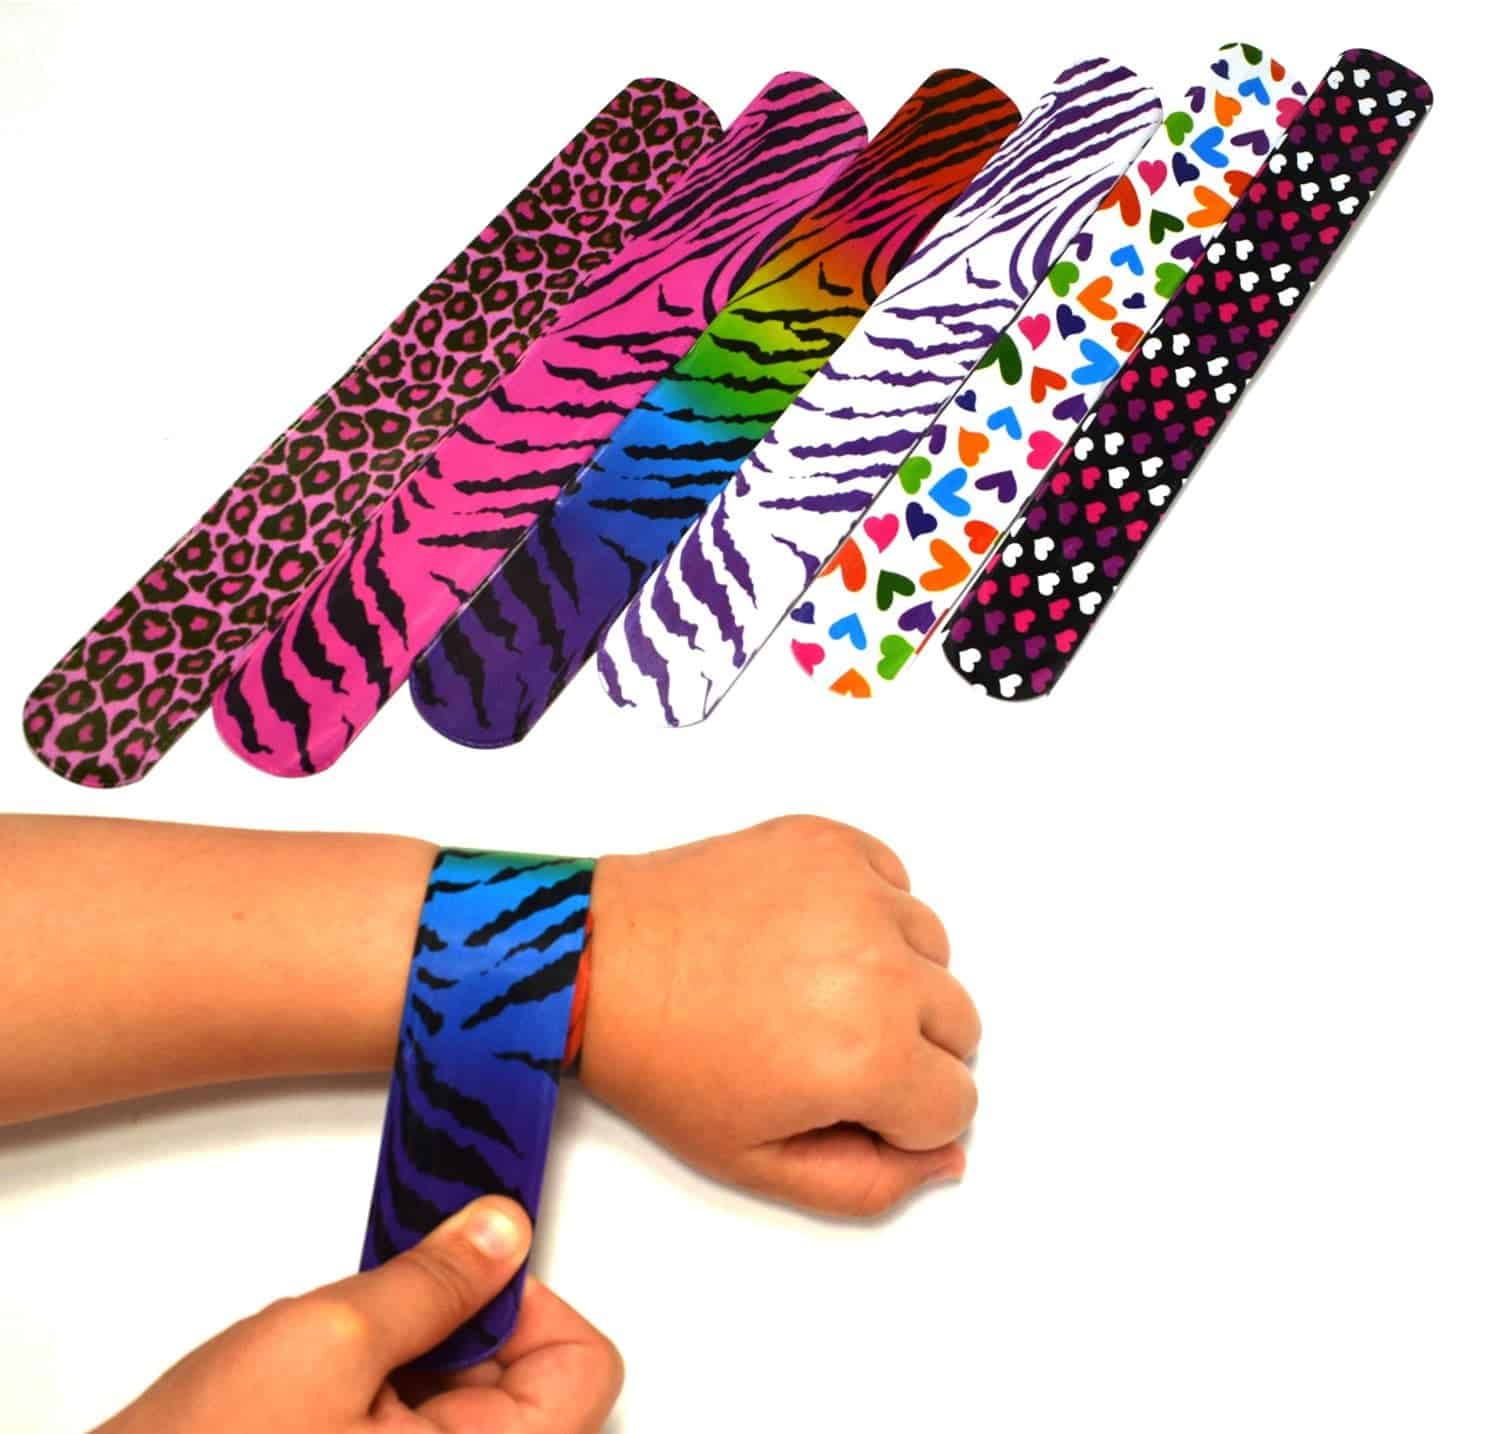 10+ Great Halloween Treats to Give out that Aren't Candy: Slap Bracelets | www.thepinningmama.com